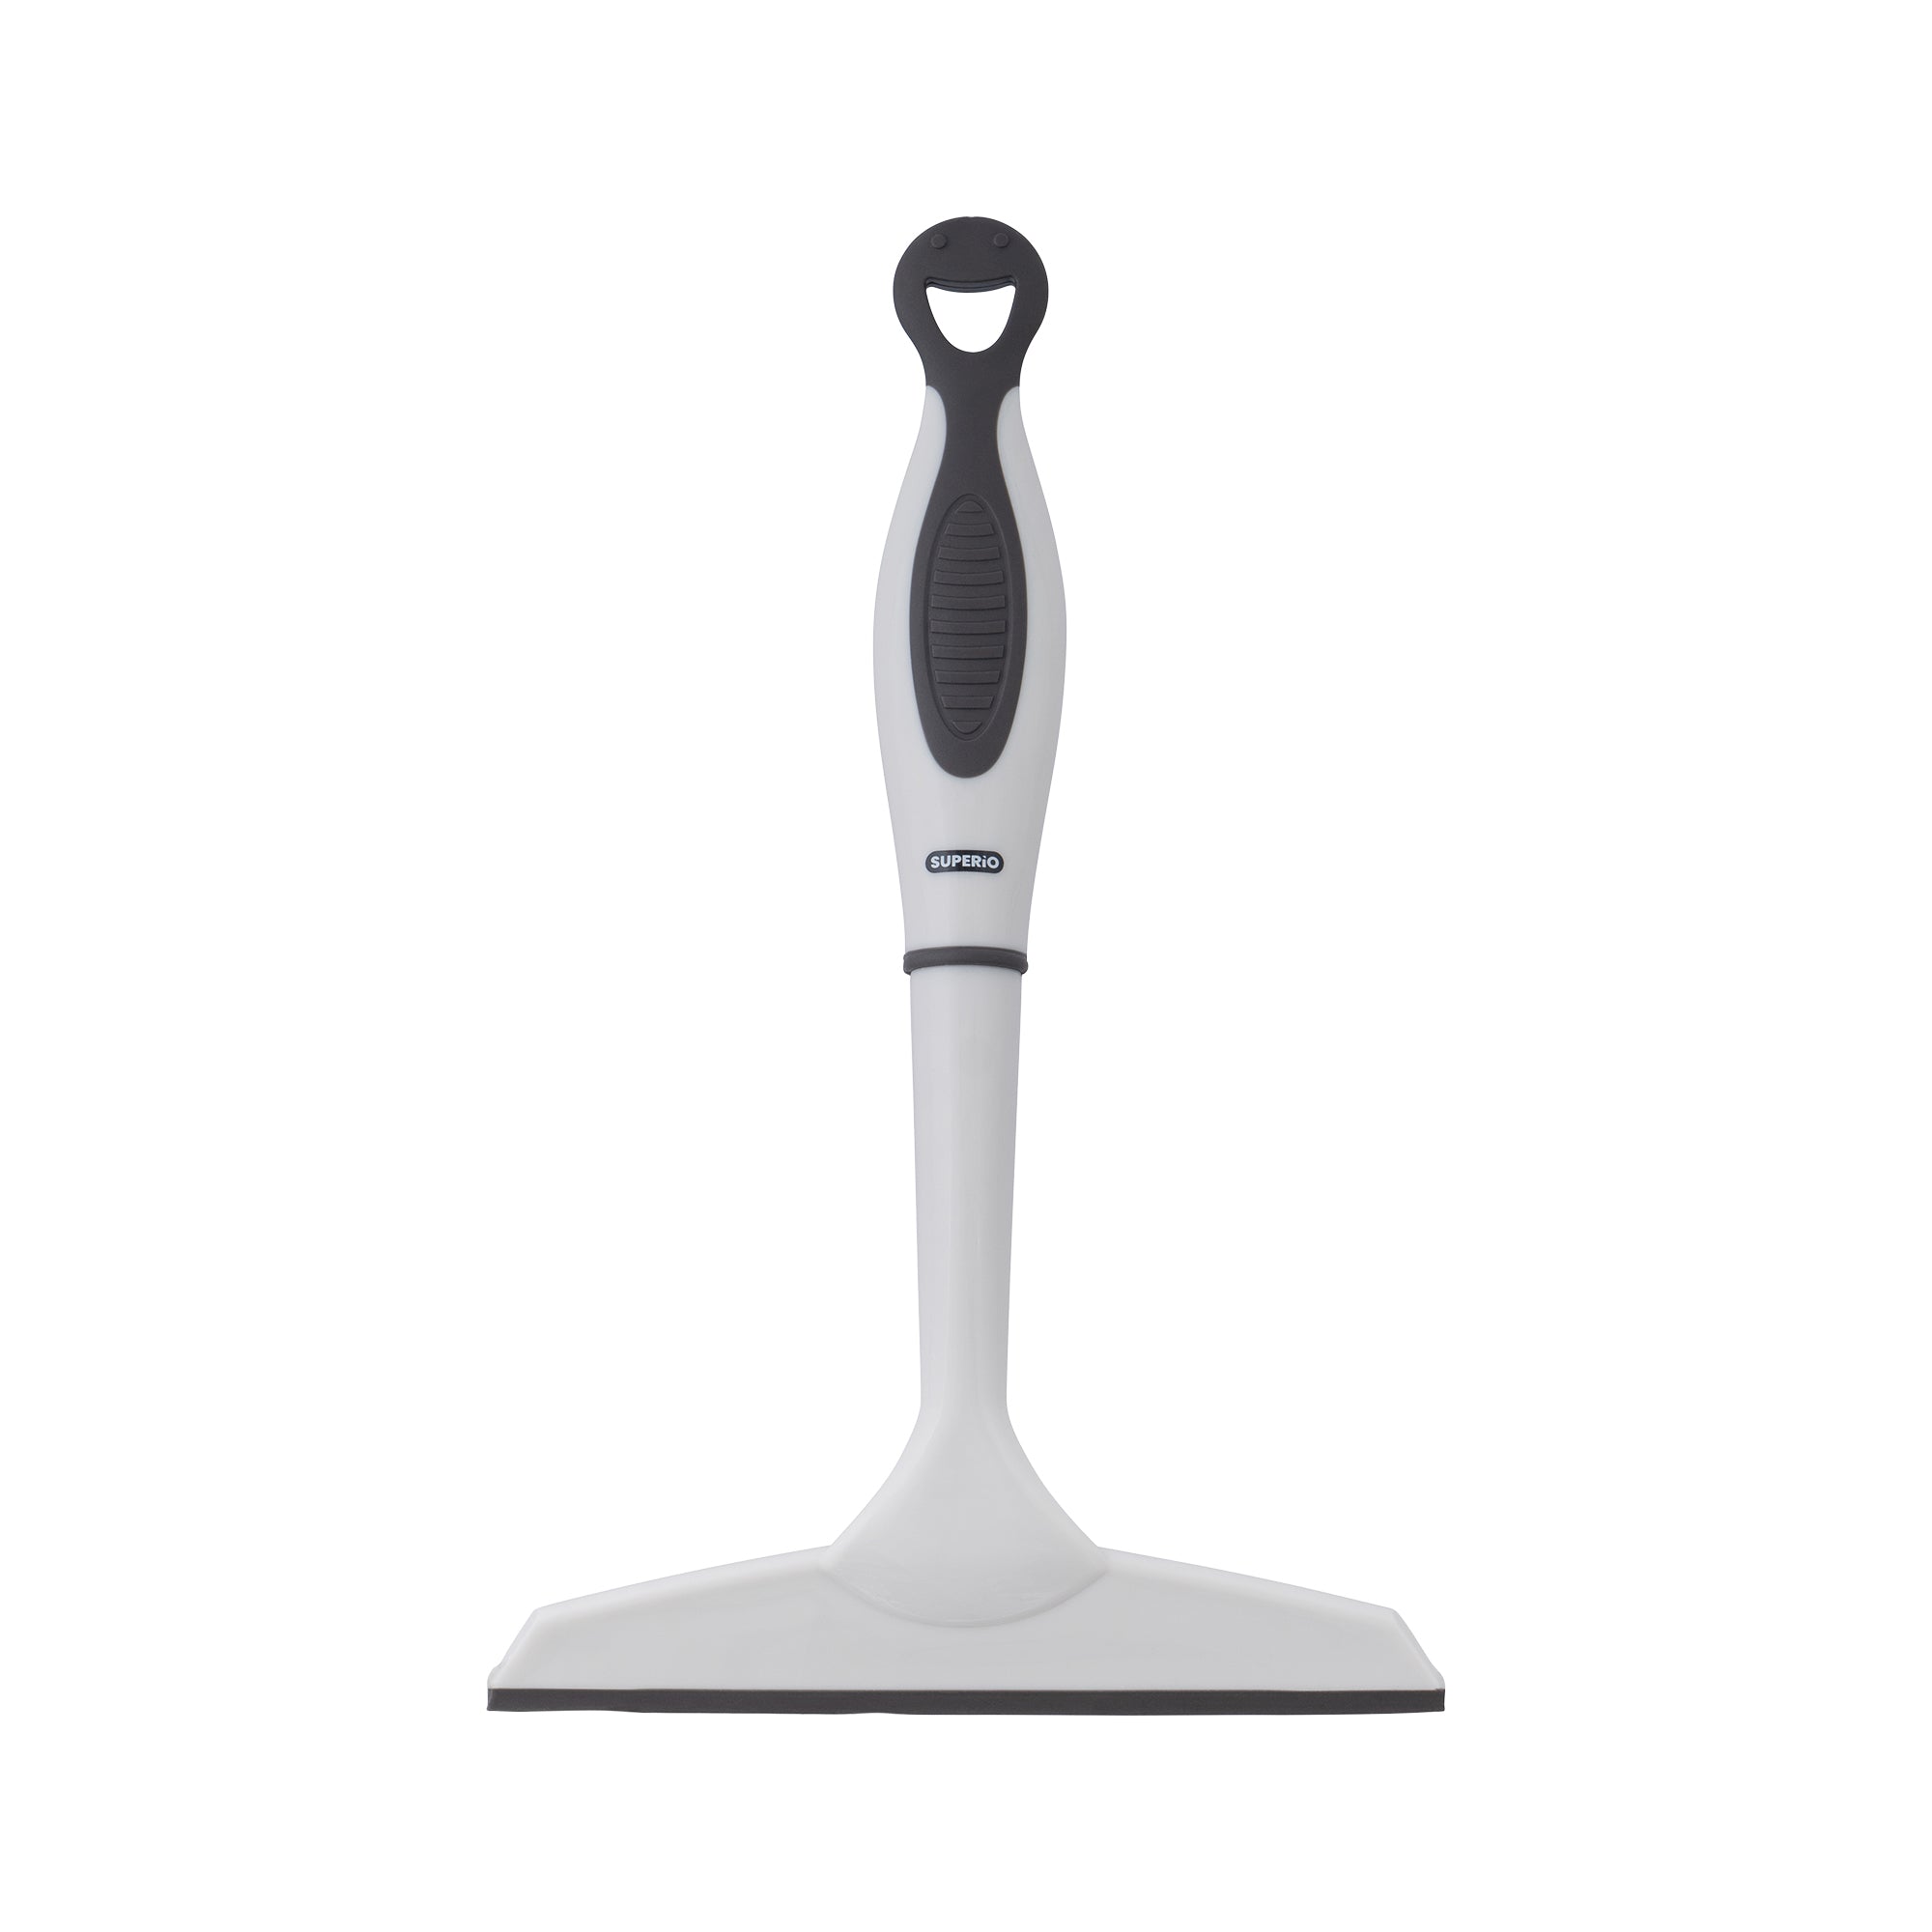 Stainless Dish Brush, Black, Sold by at Home